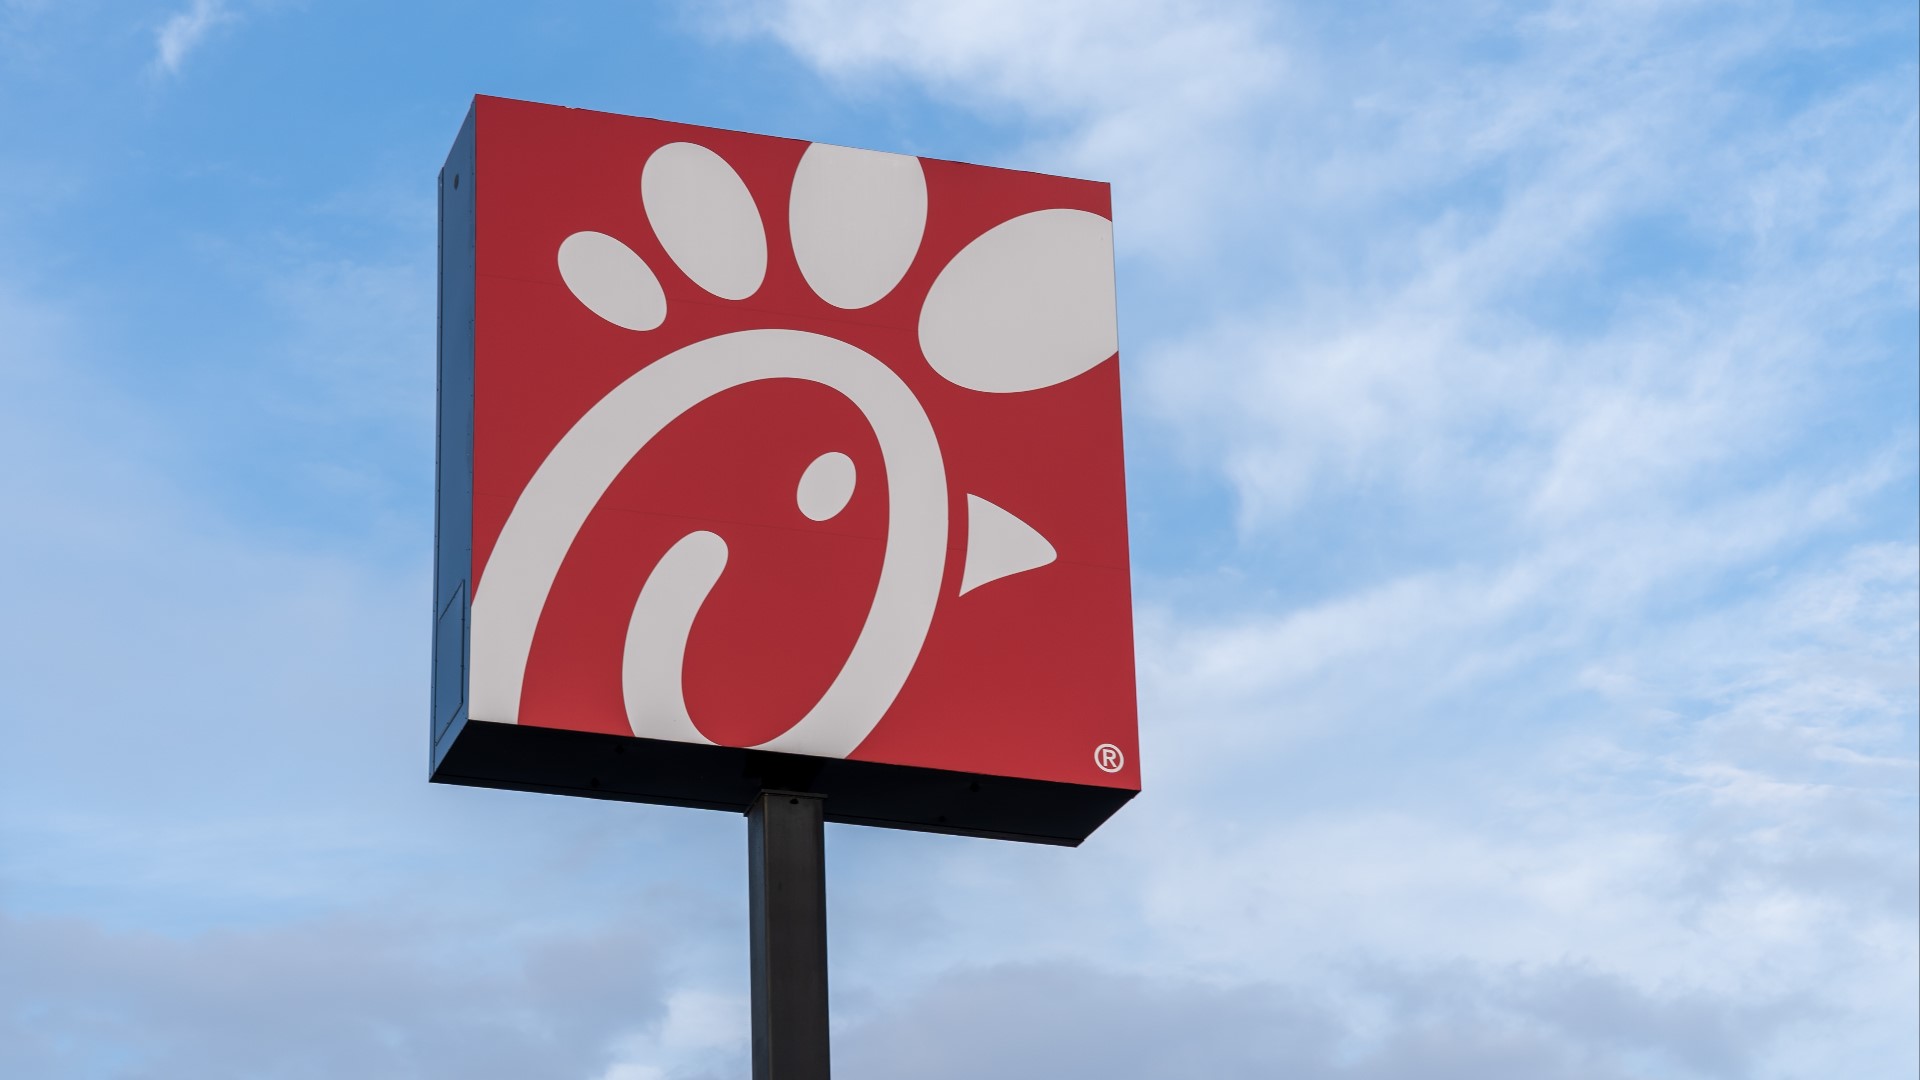 Several Chick-fil-A customers are saying hackers got ahold of their app and are swiping money from their linked bank accounts.